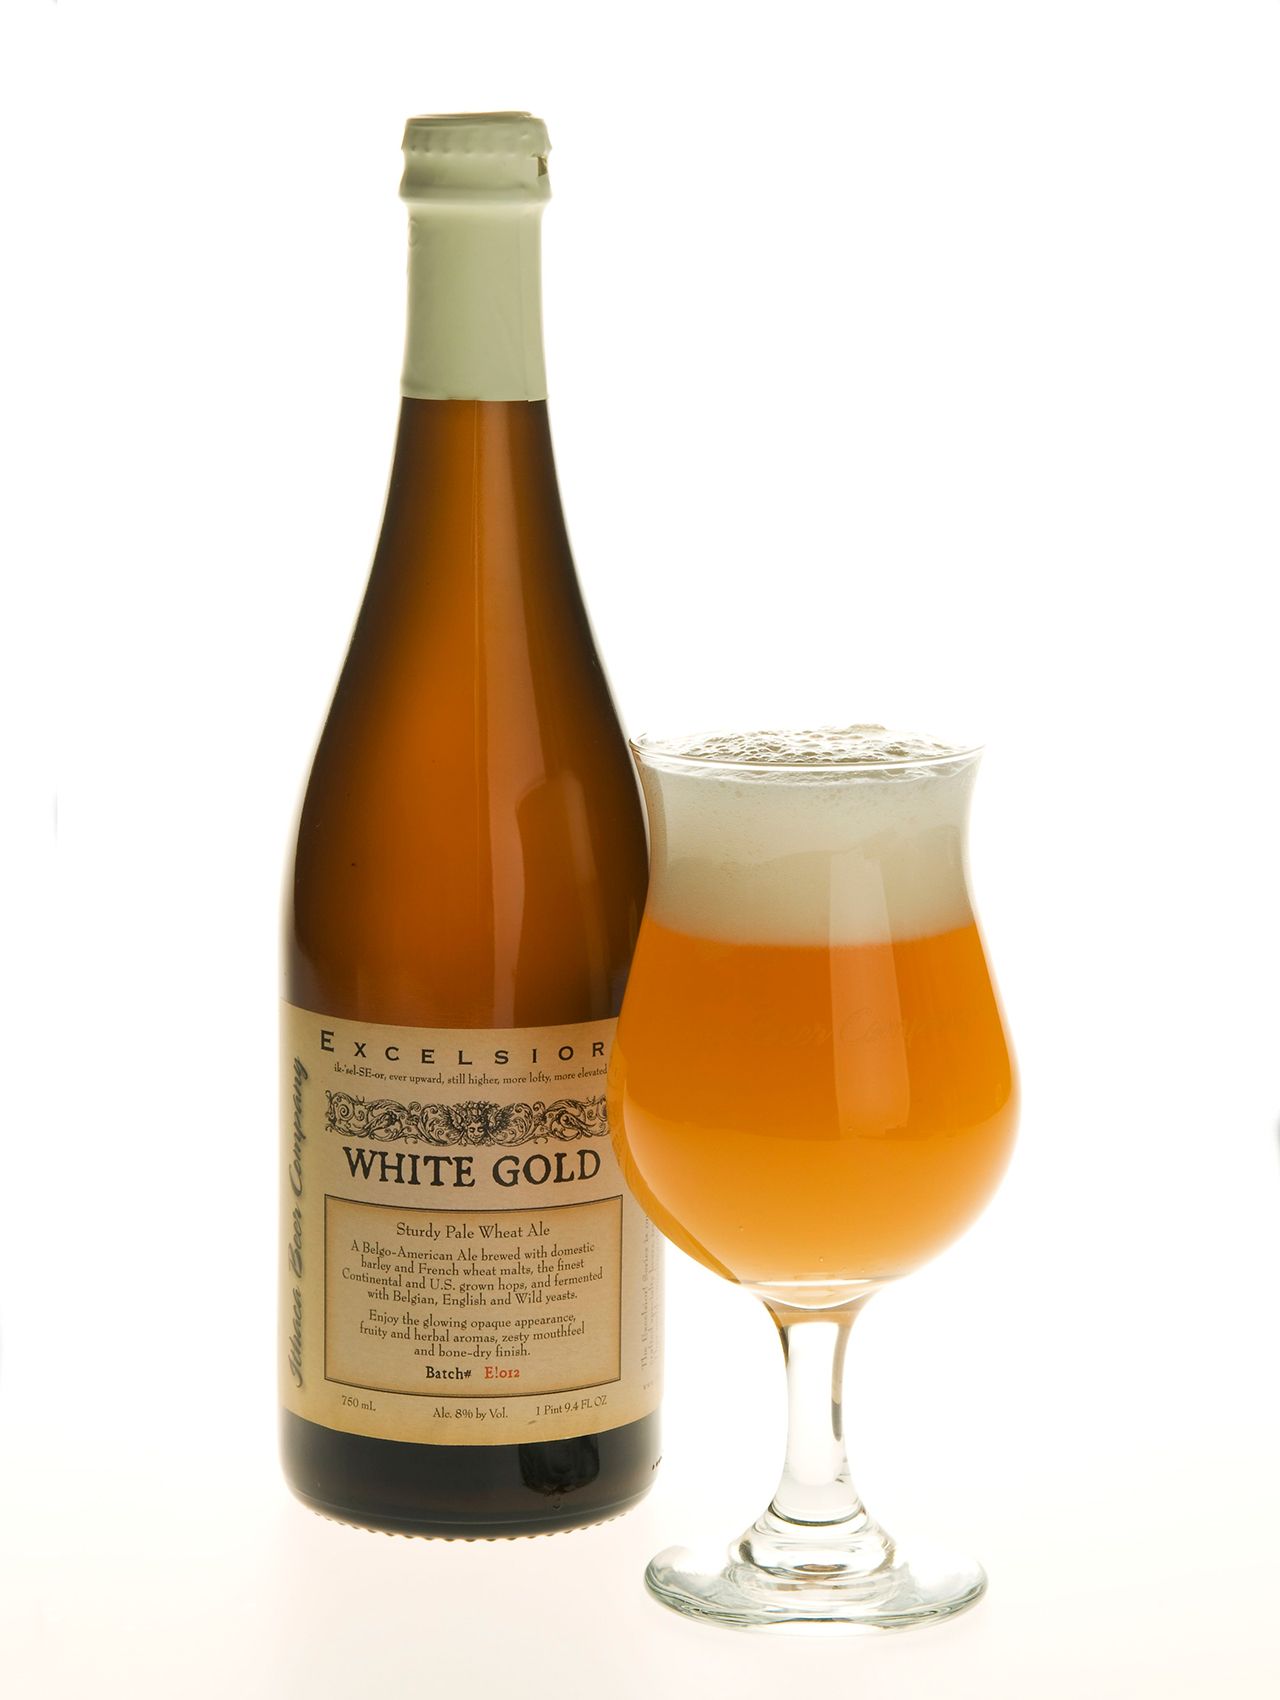 Excelsior White Gold by Ithaca Beer